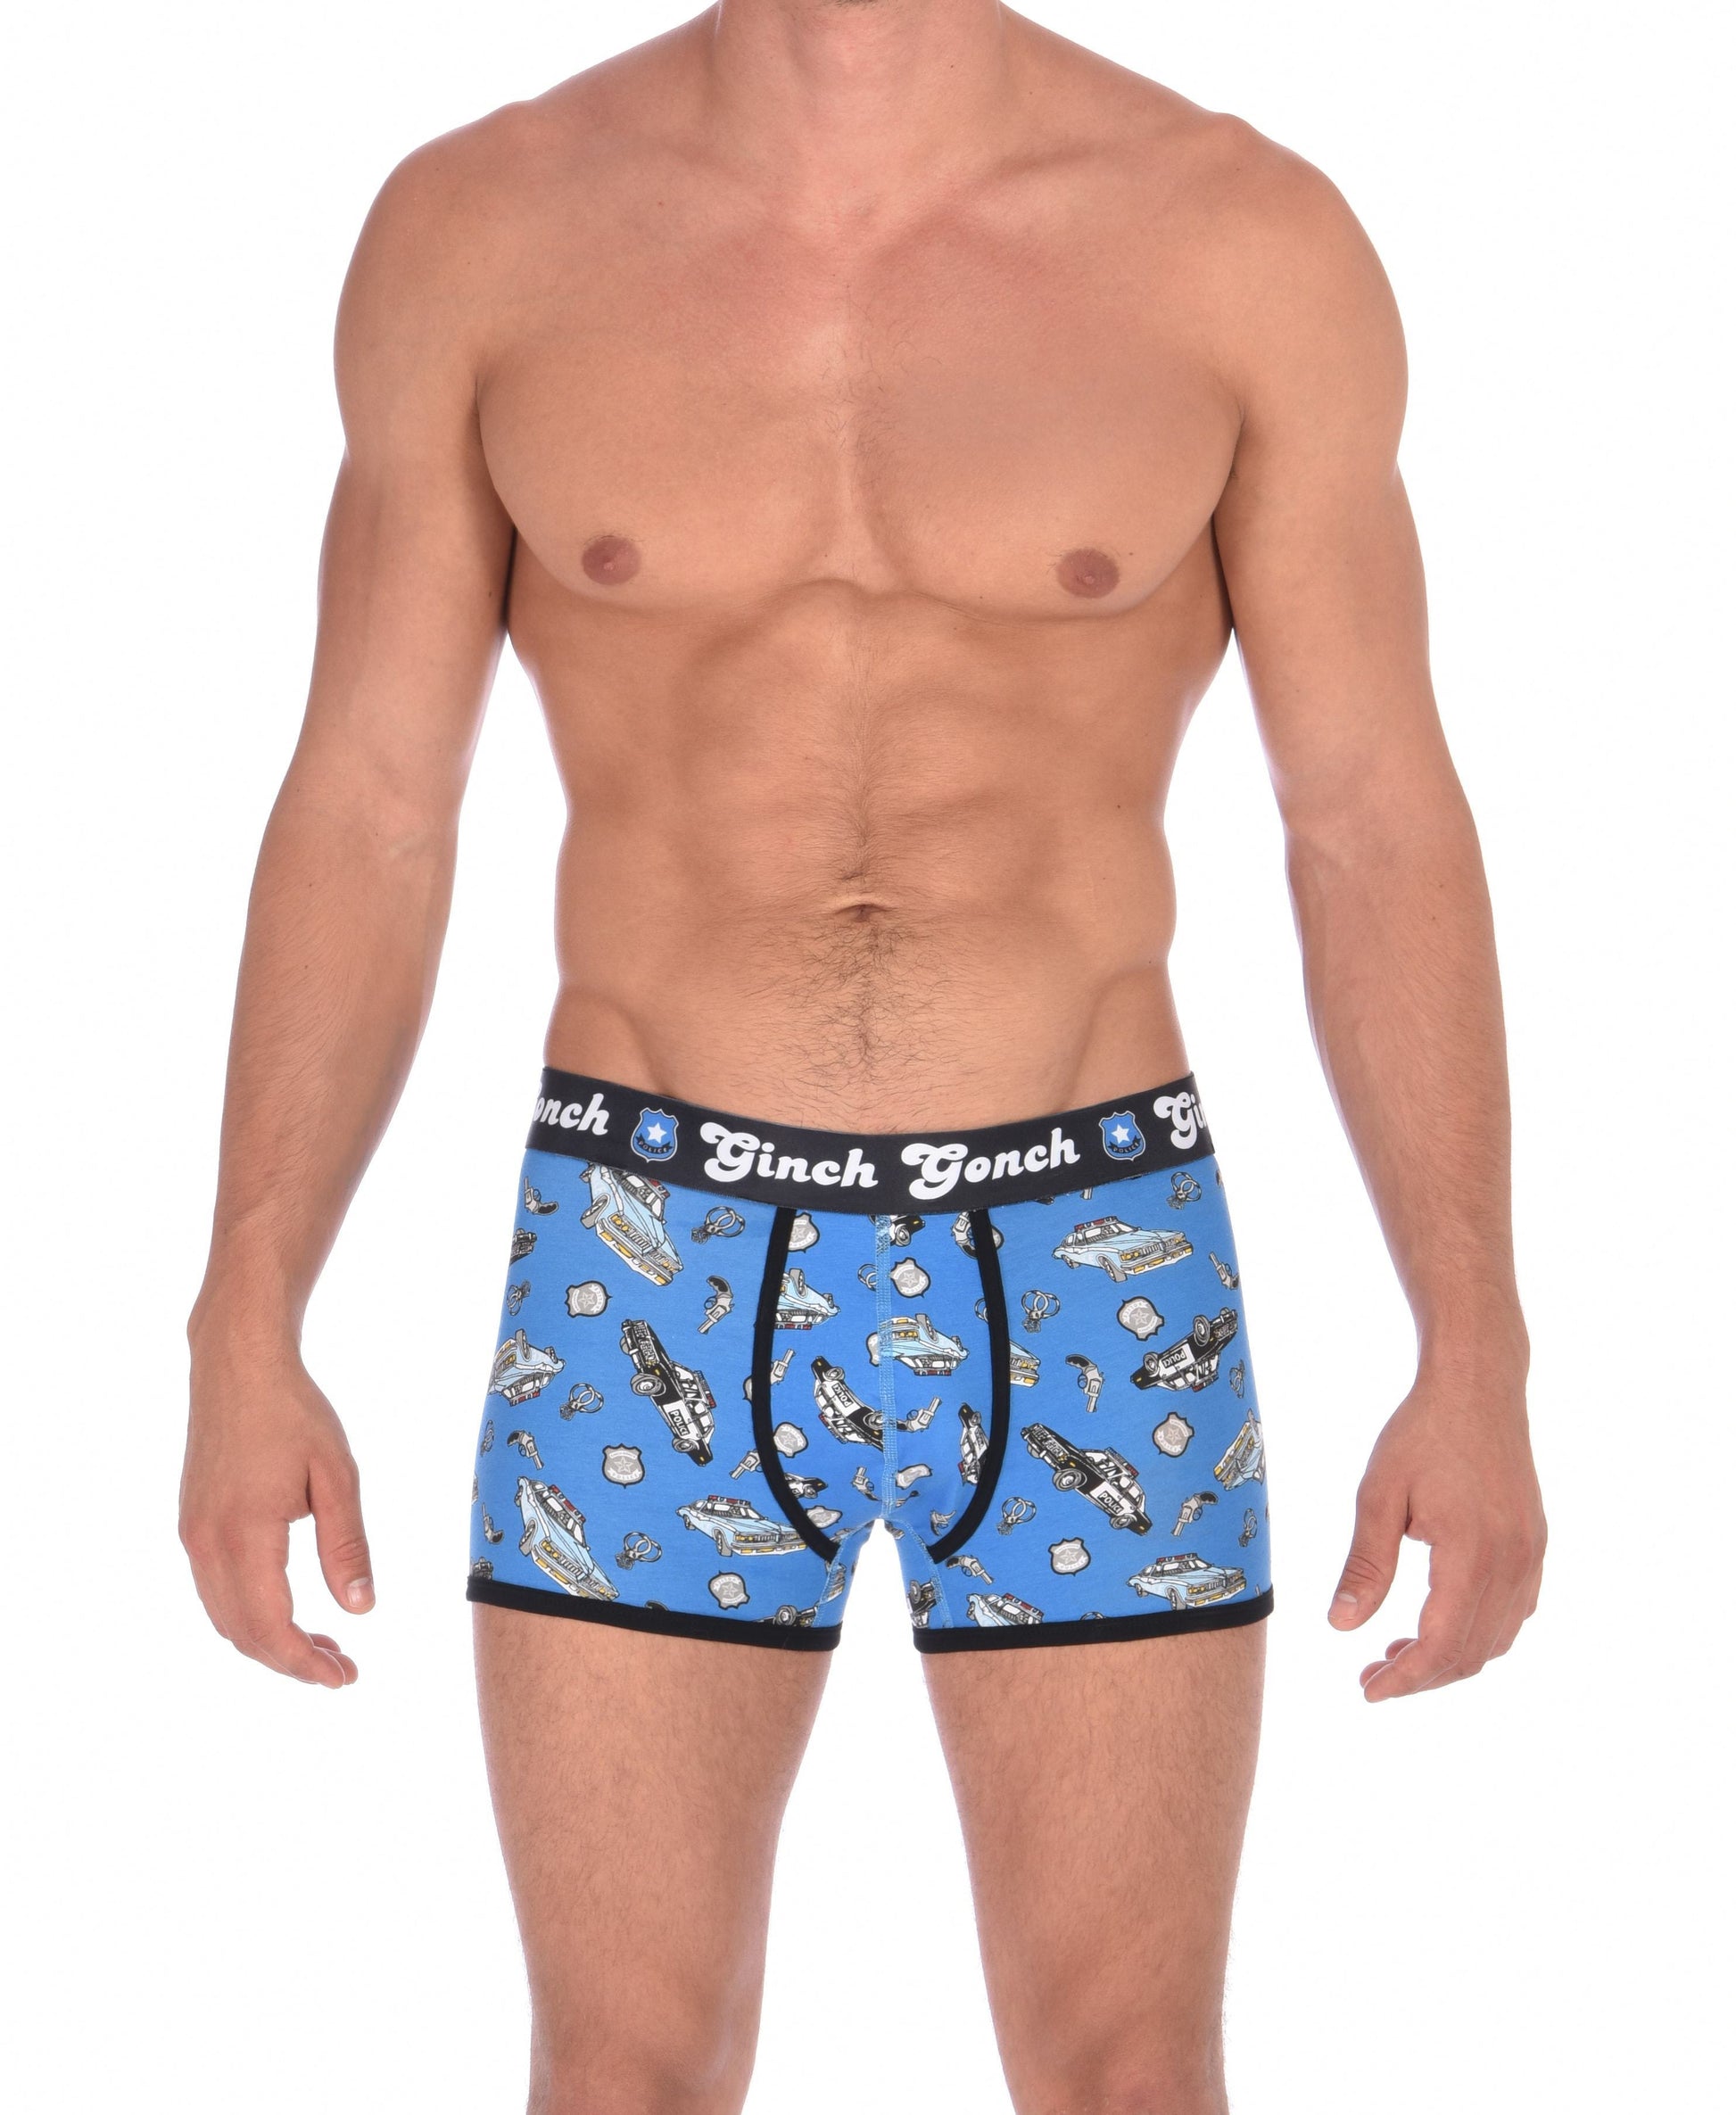 Ginch GonchGG Patrol Boxer Brief trunk men's underwear blue fabric with cop cars, badges, hand cuffs, and guns. Black trim and black printed waistband front. 